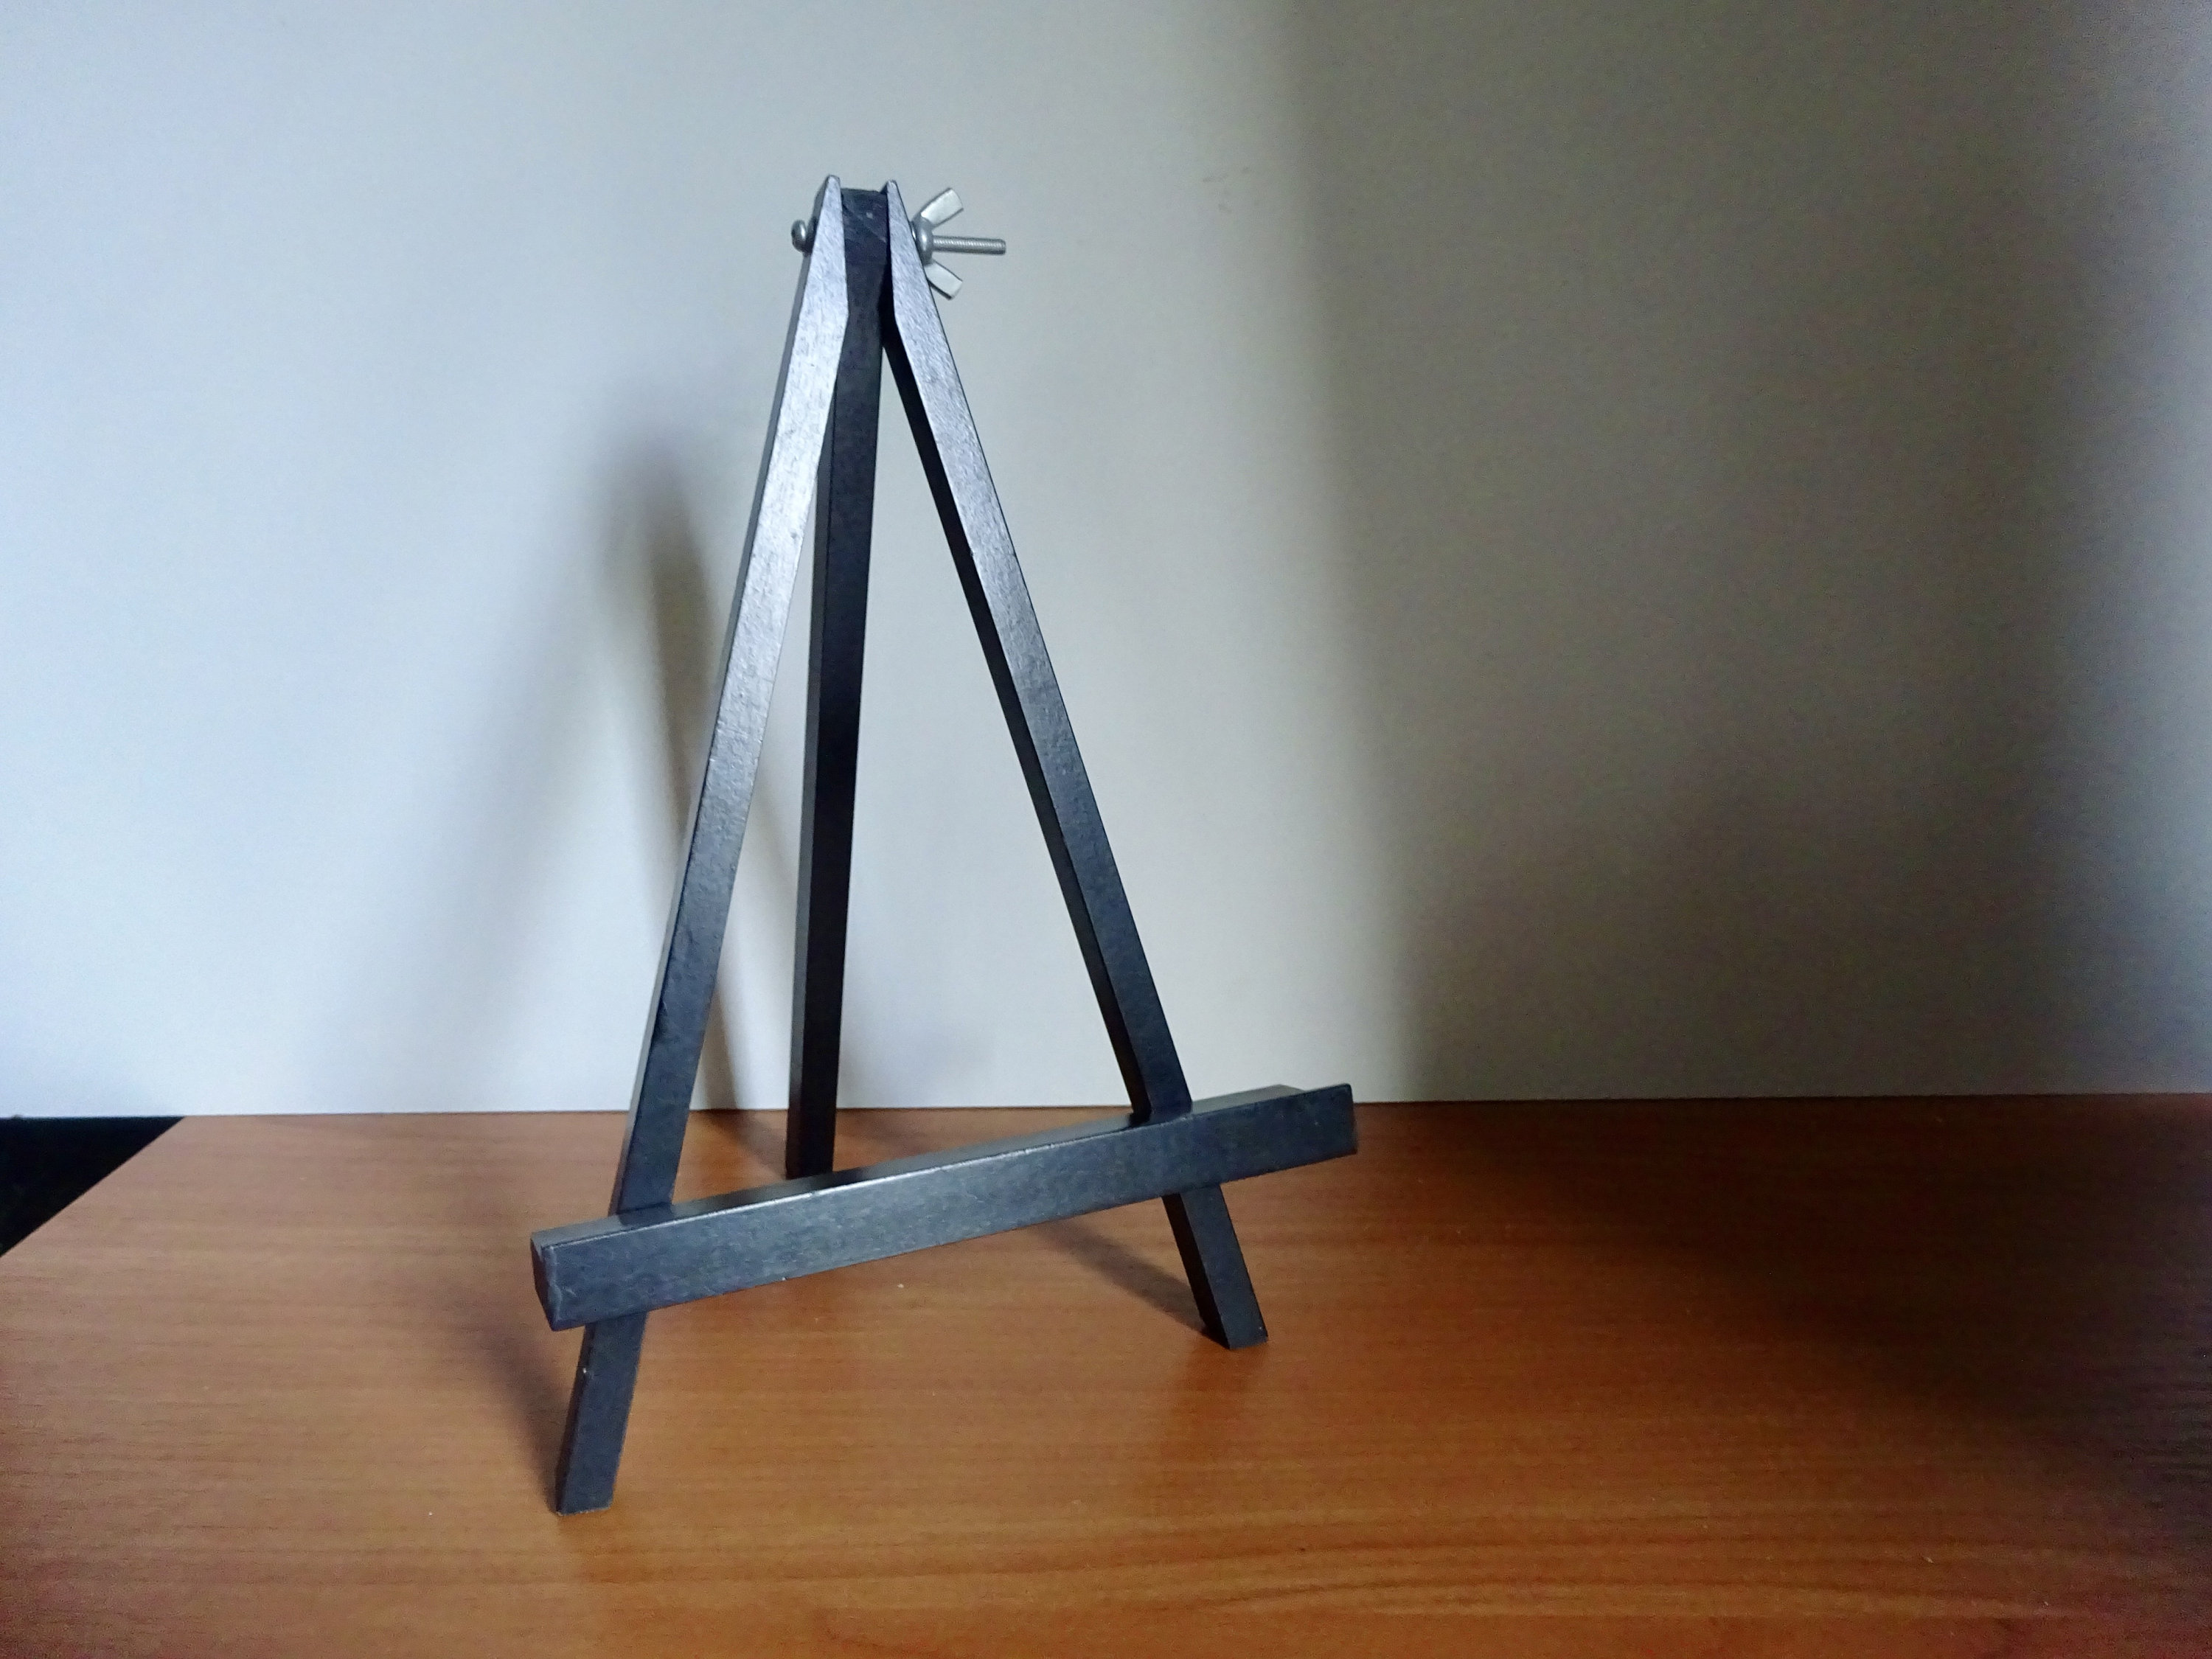  Funeral Easel Stand, Black Easel Stand for Picture, Acrylic  Sign Stand, Easel for Memorial Service, Beveled Wood, 65 Inch Tall, Wooden Floor  Easels for Display